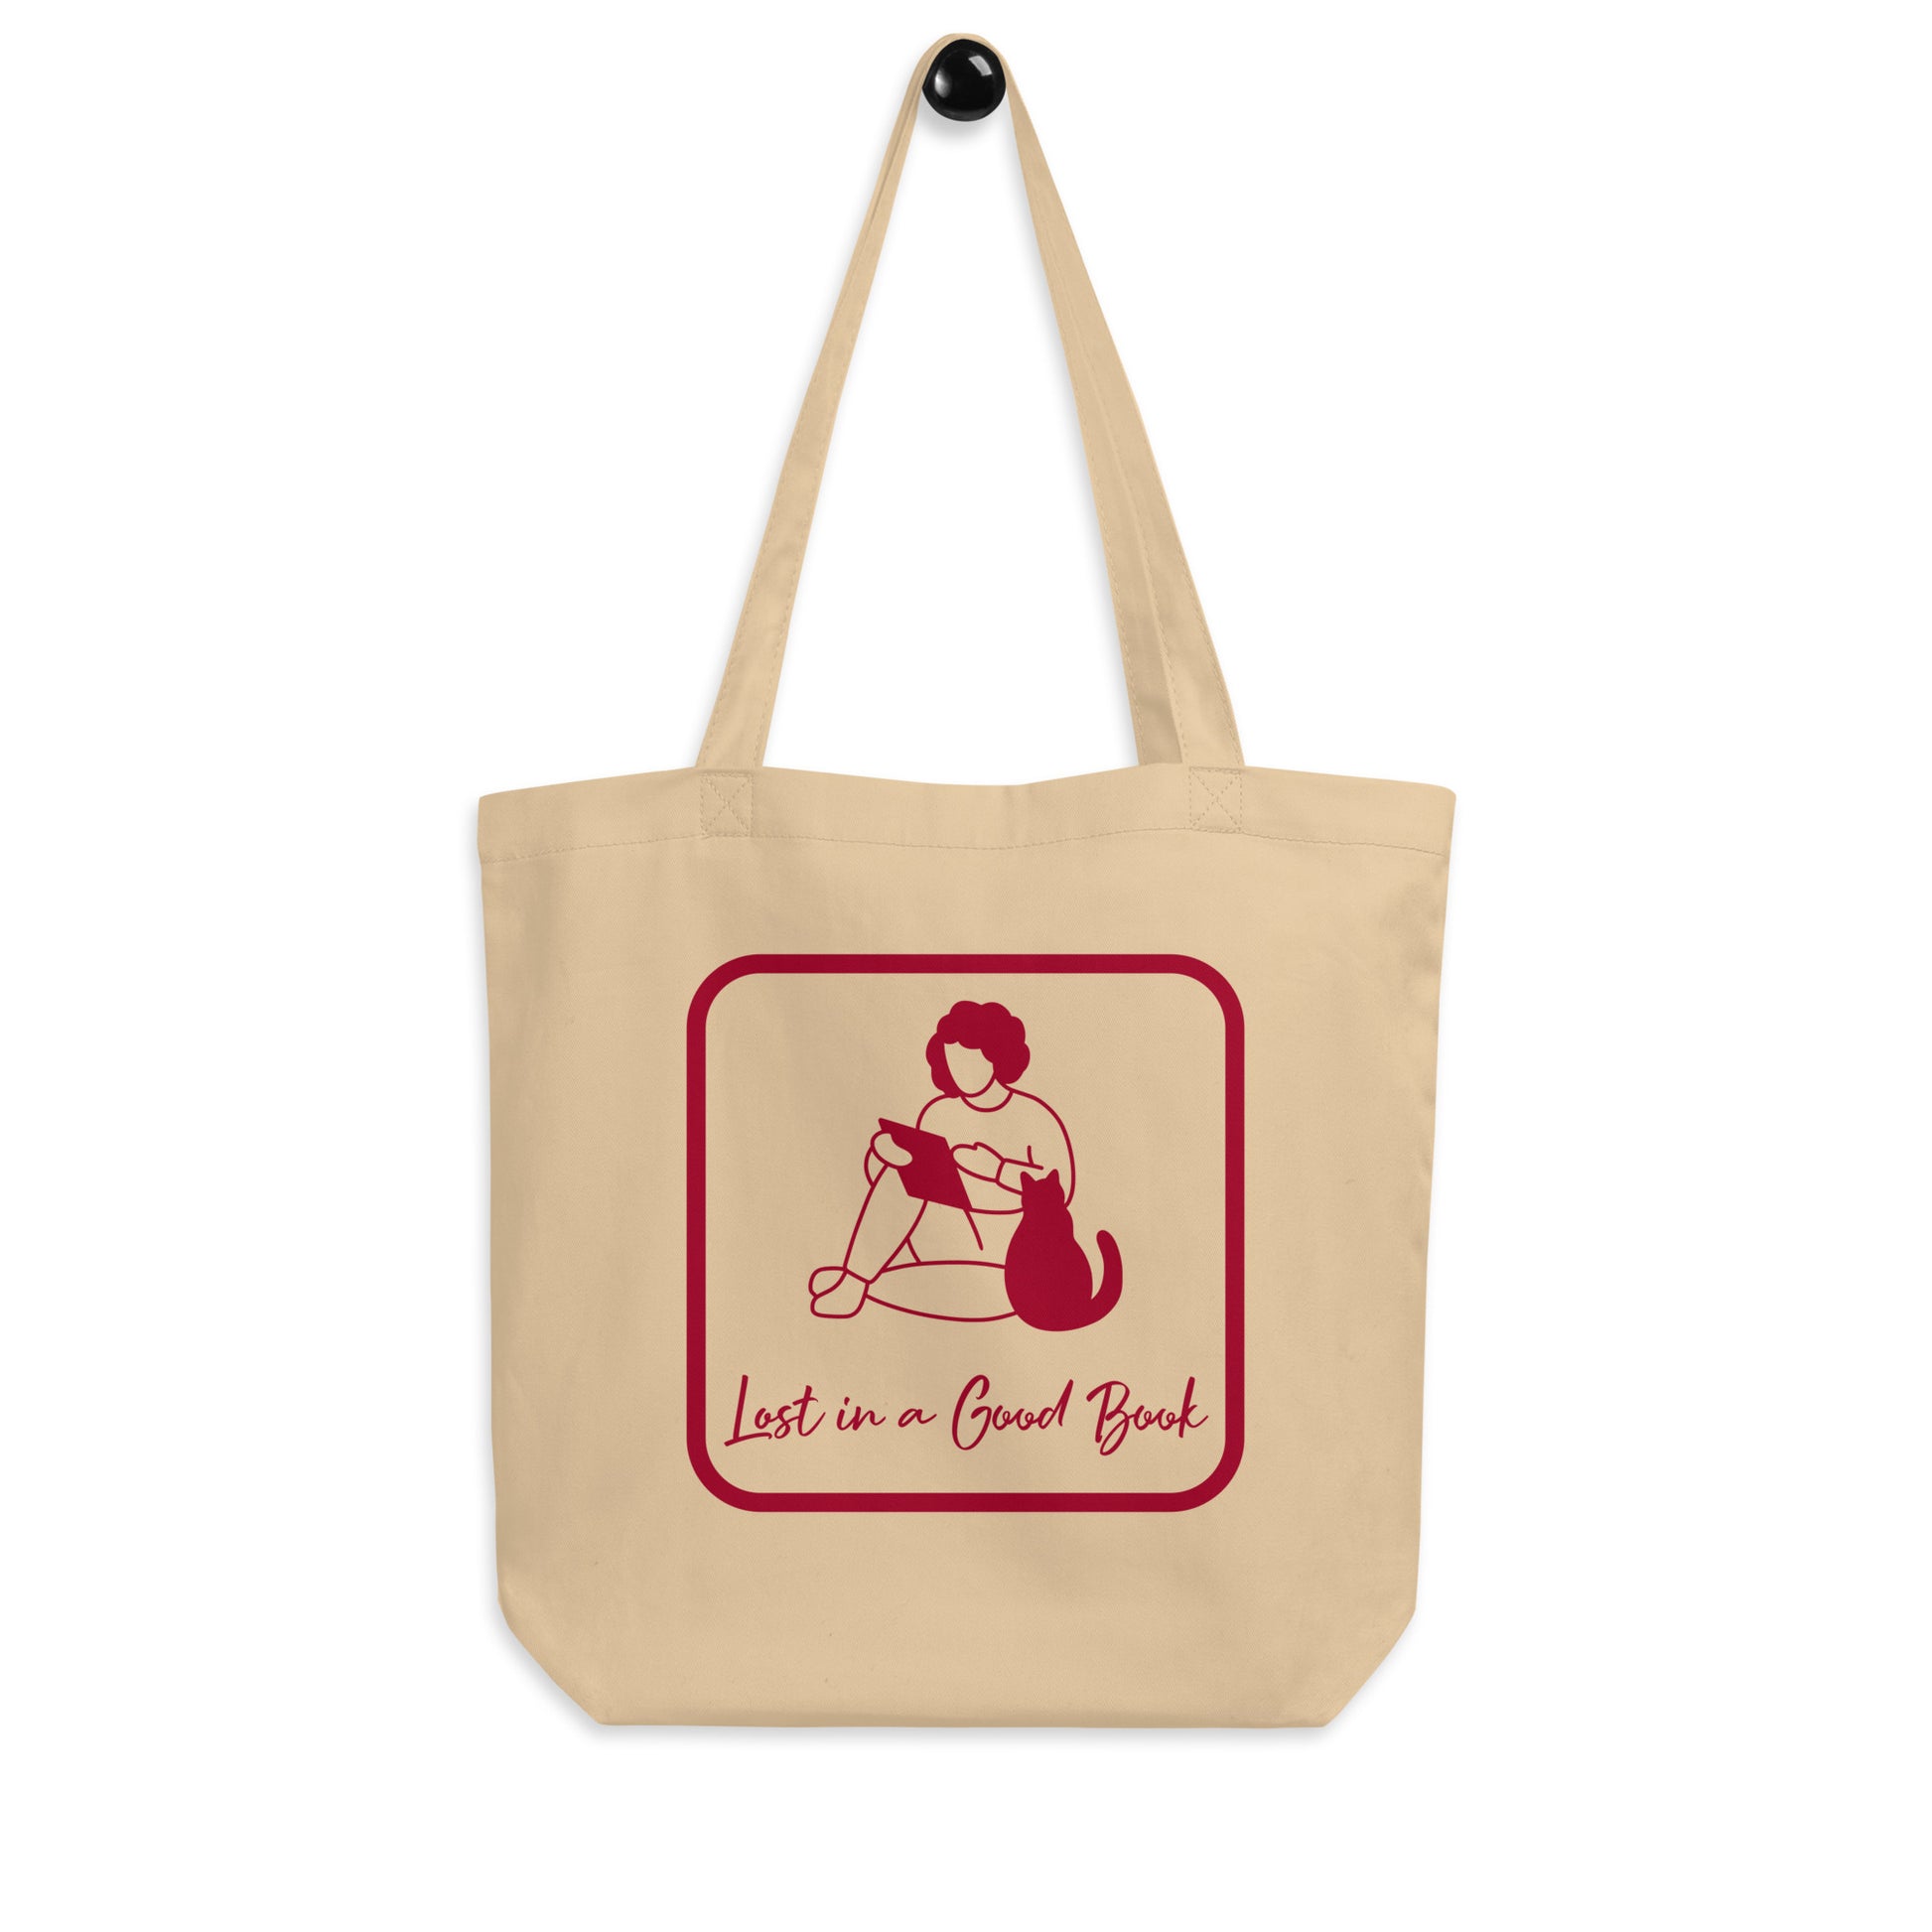 Eco Tote Bag-Lost in a Good Book - The Spinster Librarian Shop